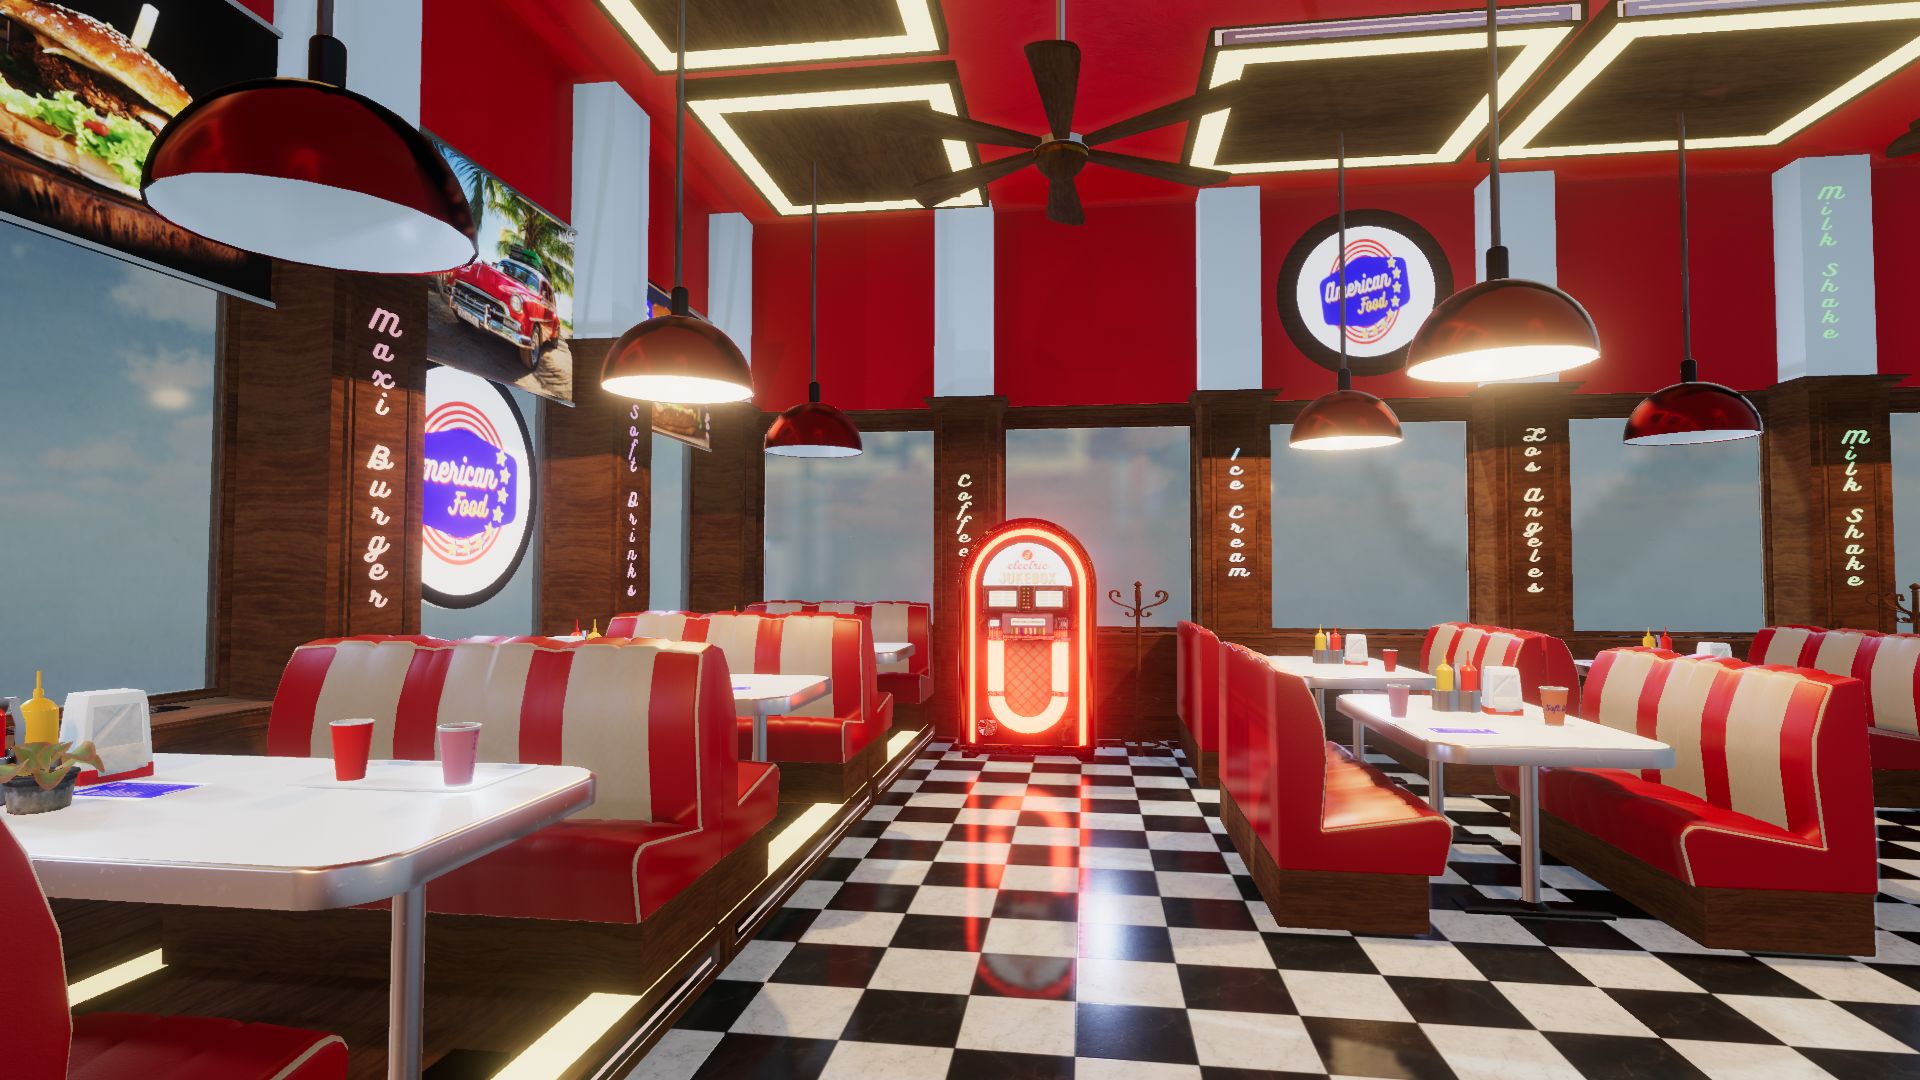 An image showing American Food Restaurant asset pack, created with Unity Engine.